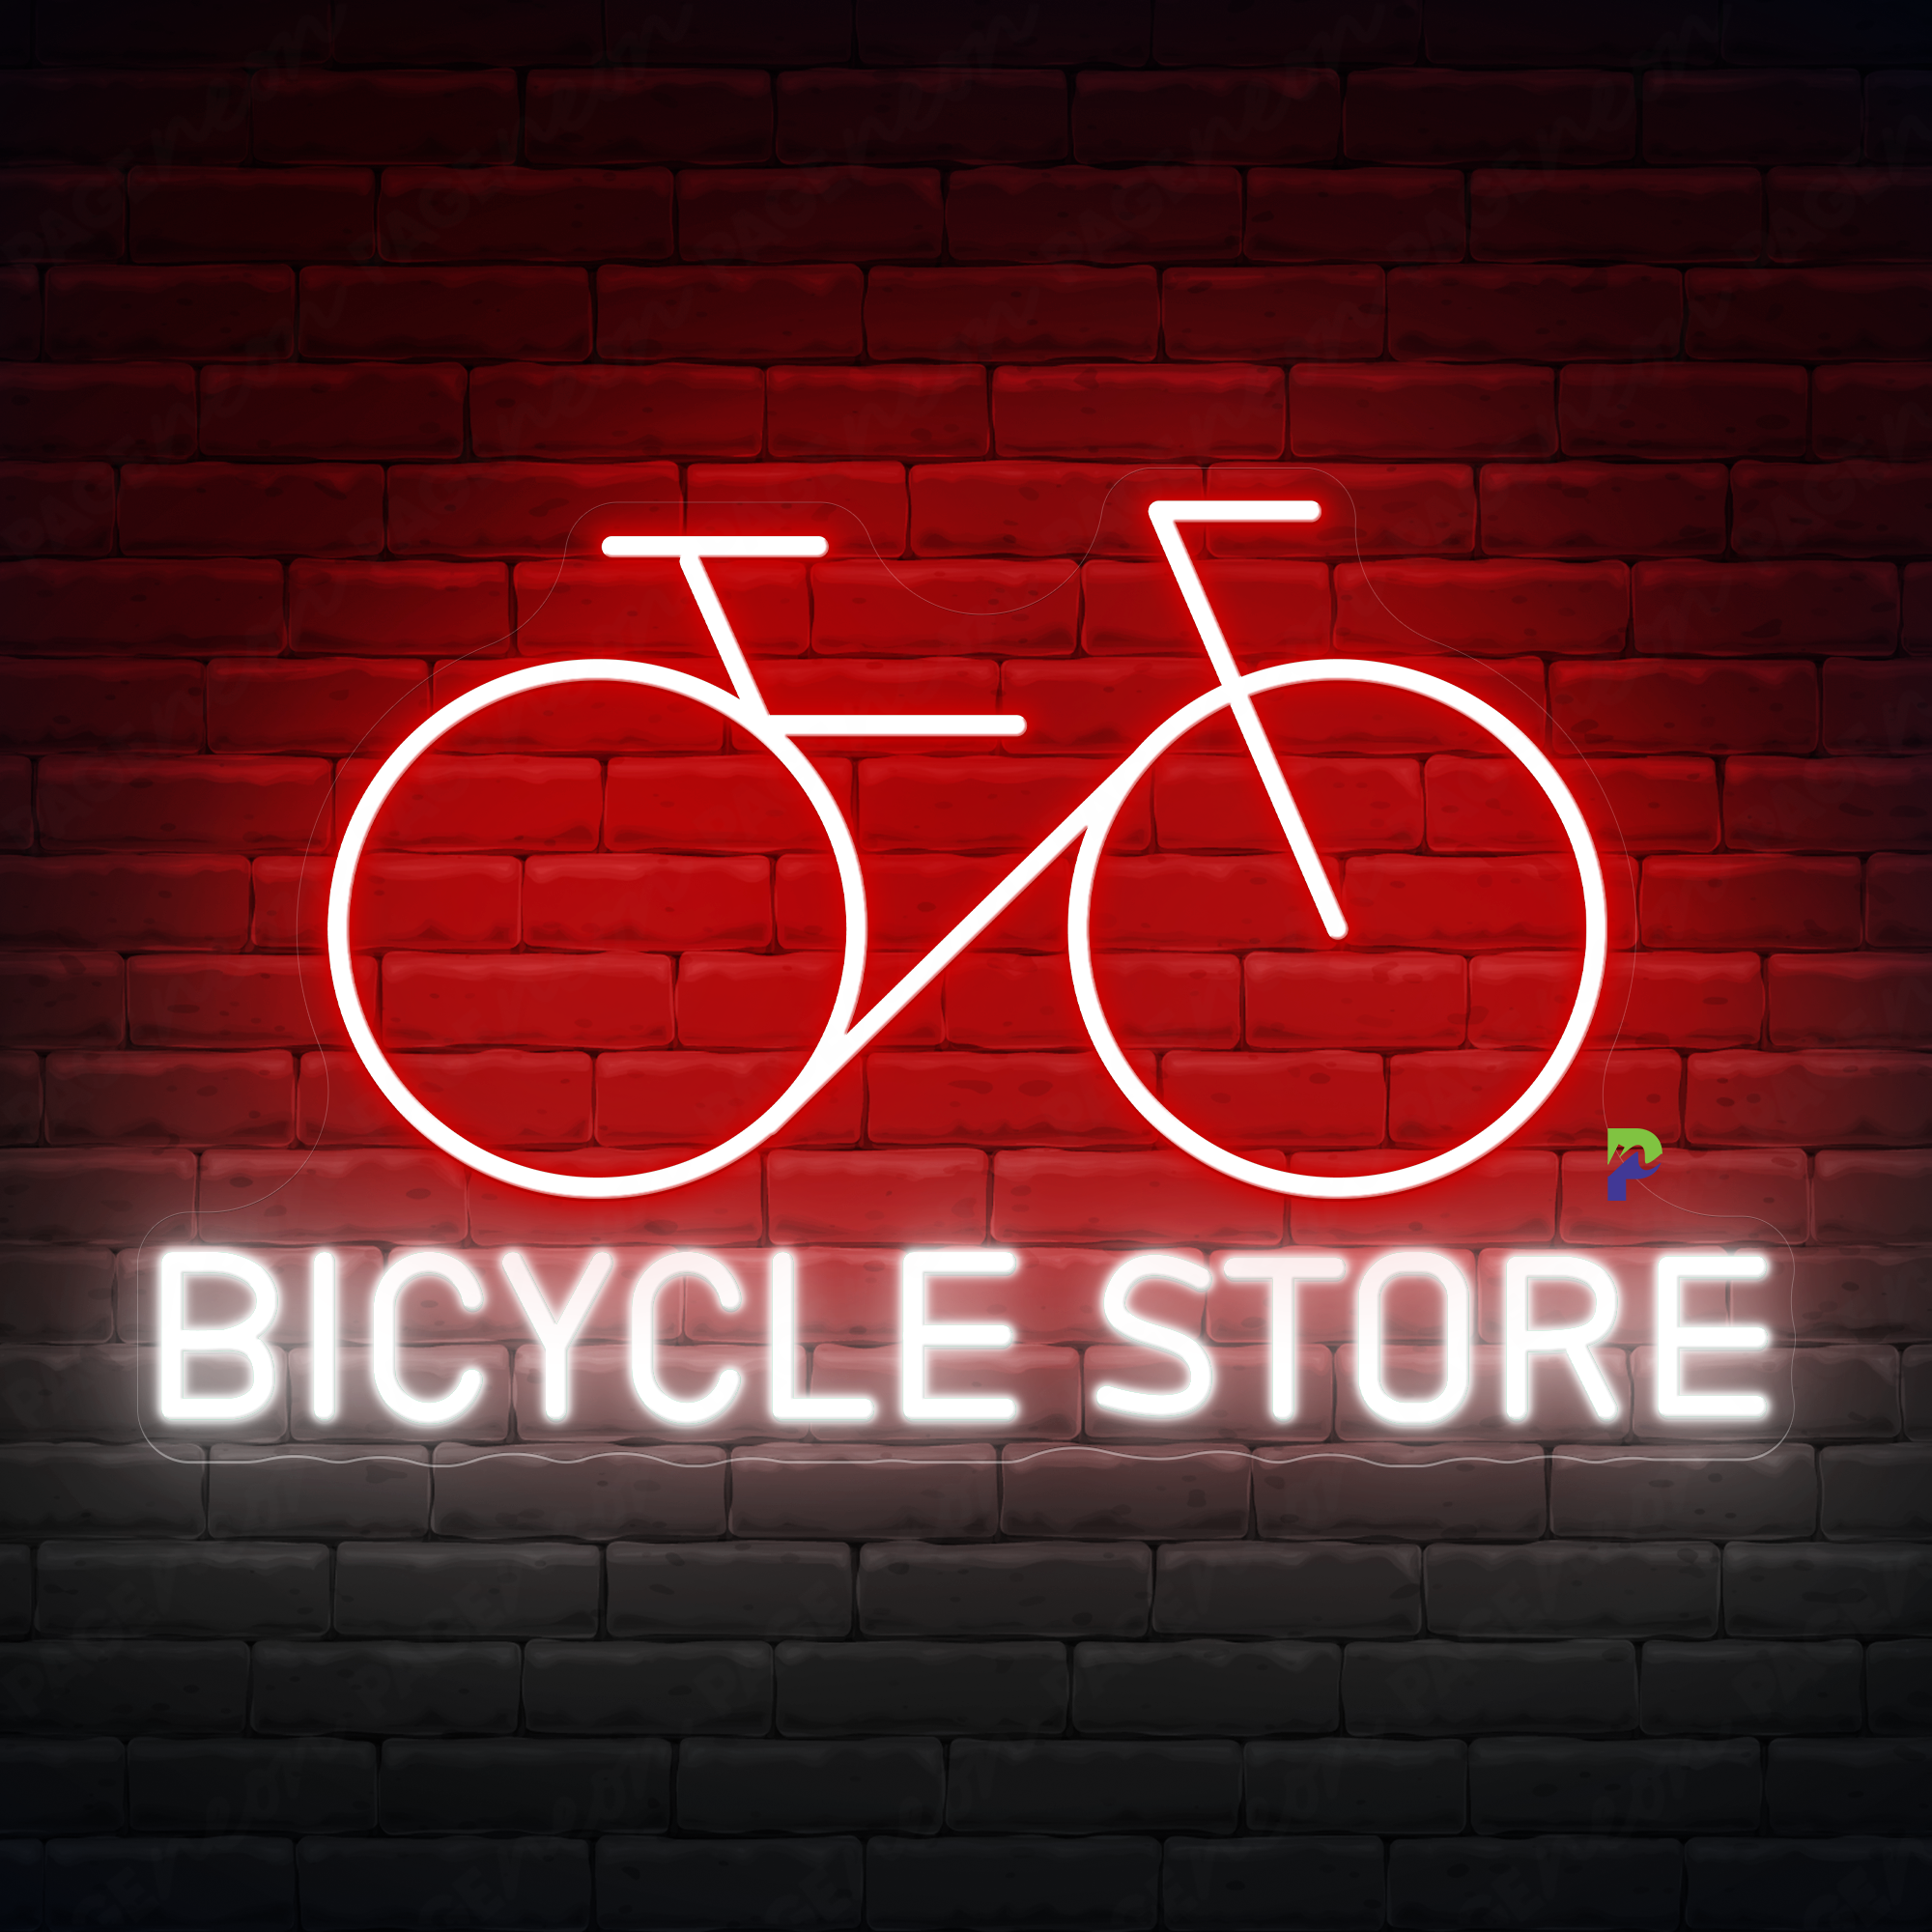 Bicycle Store Neon Signs Business Led Light